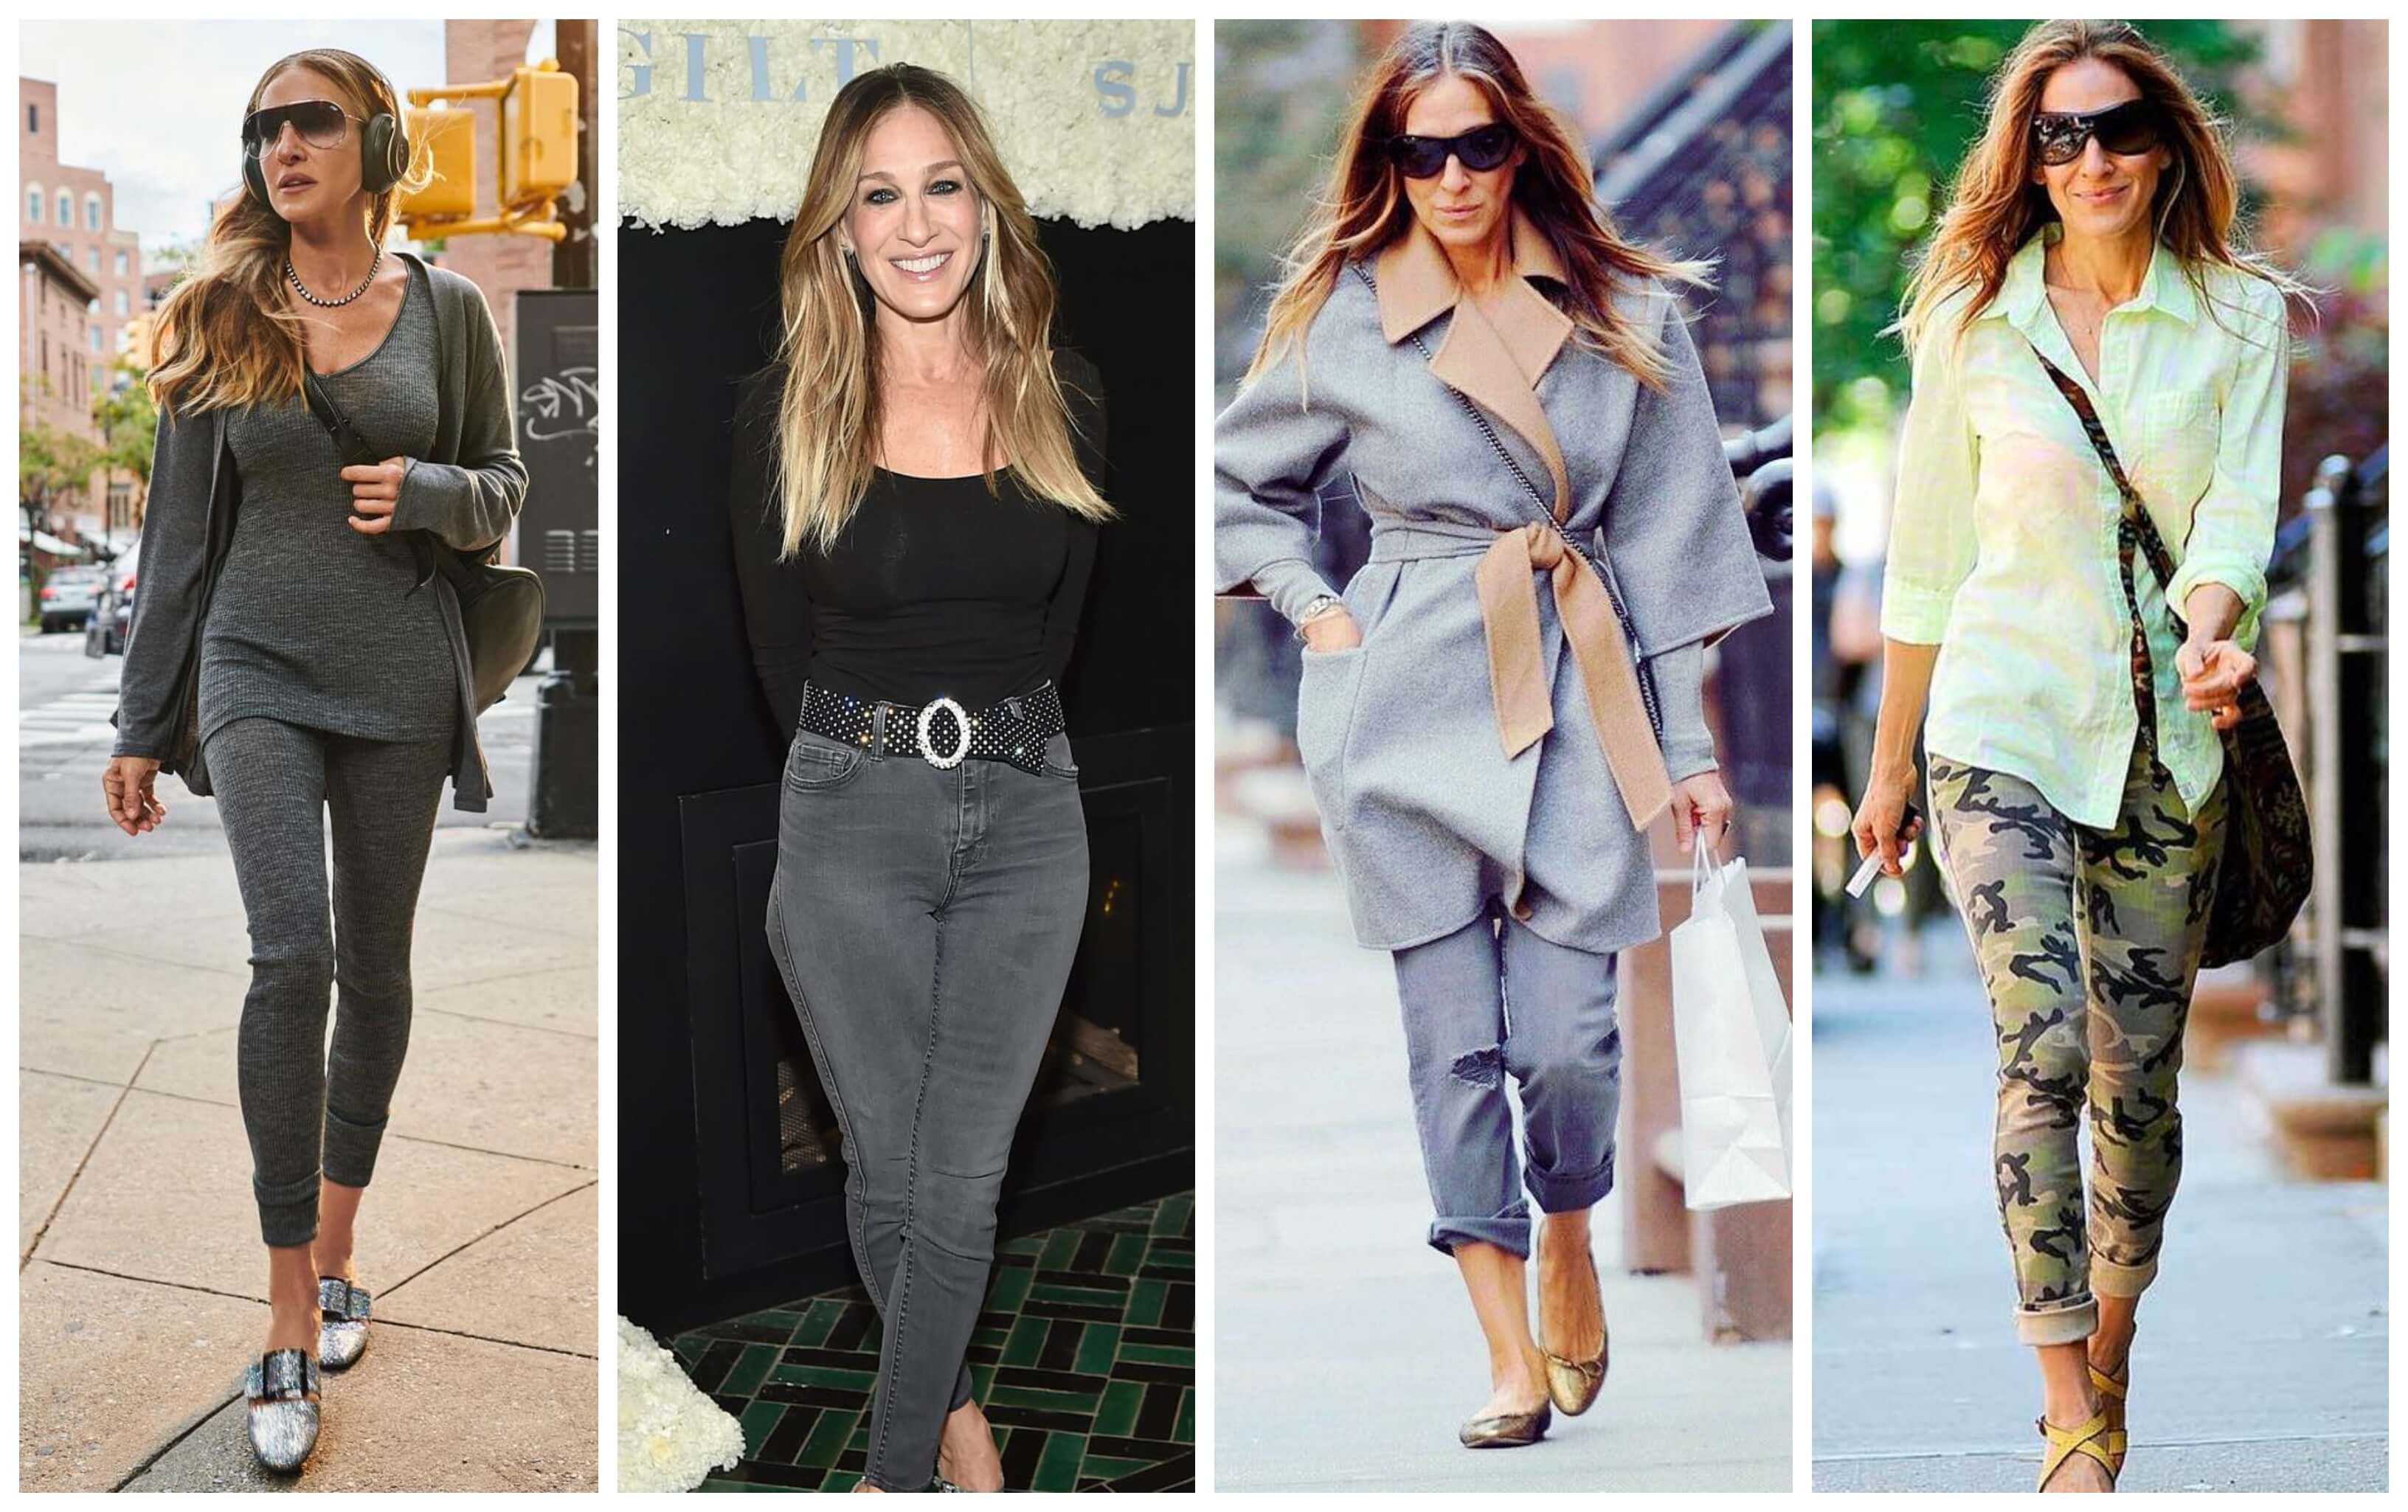 Sarah Jessica Parker con looks casuales